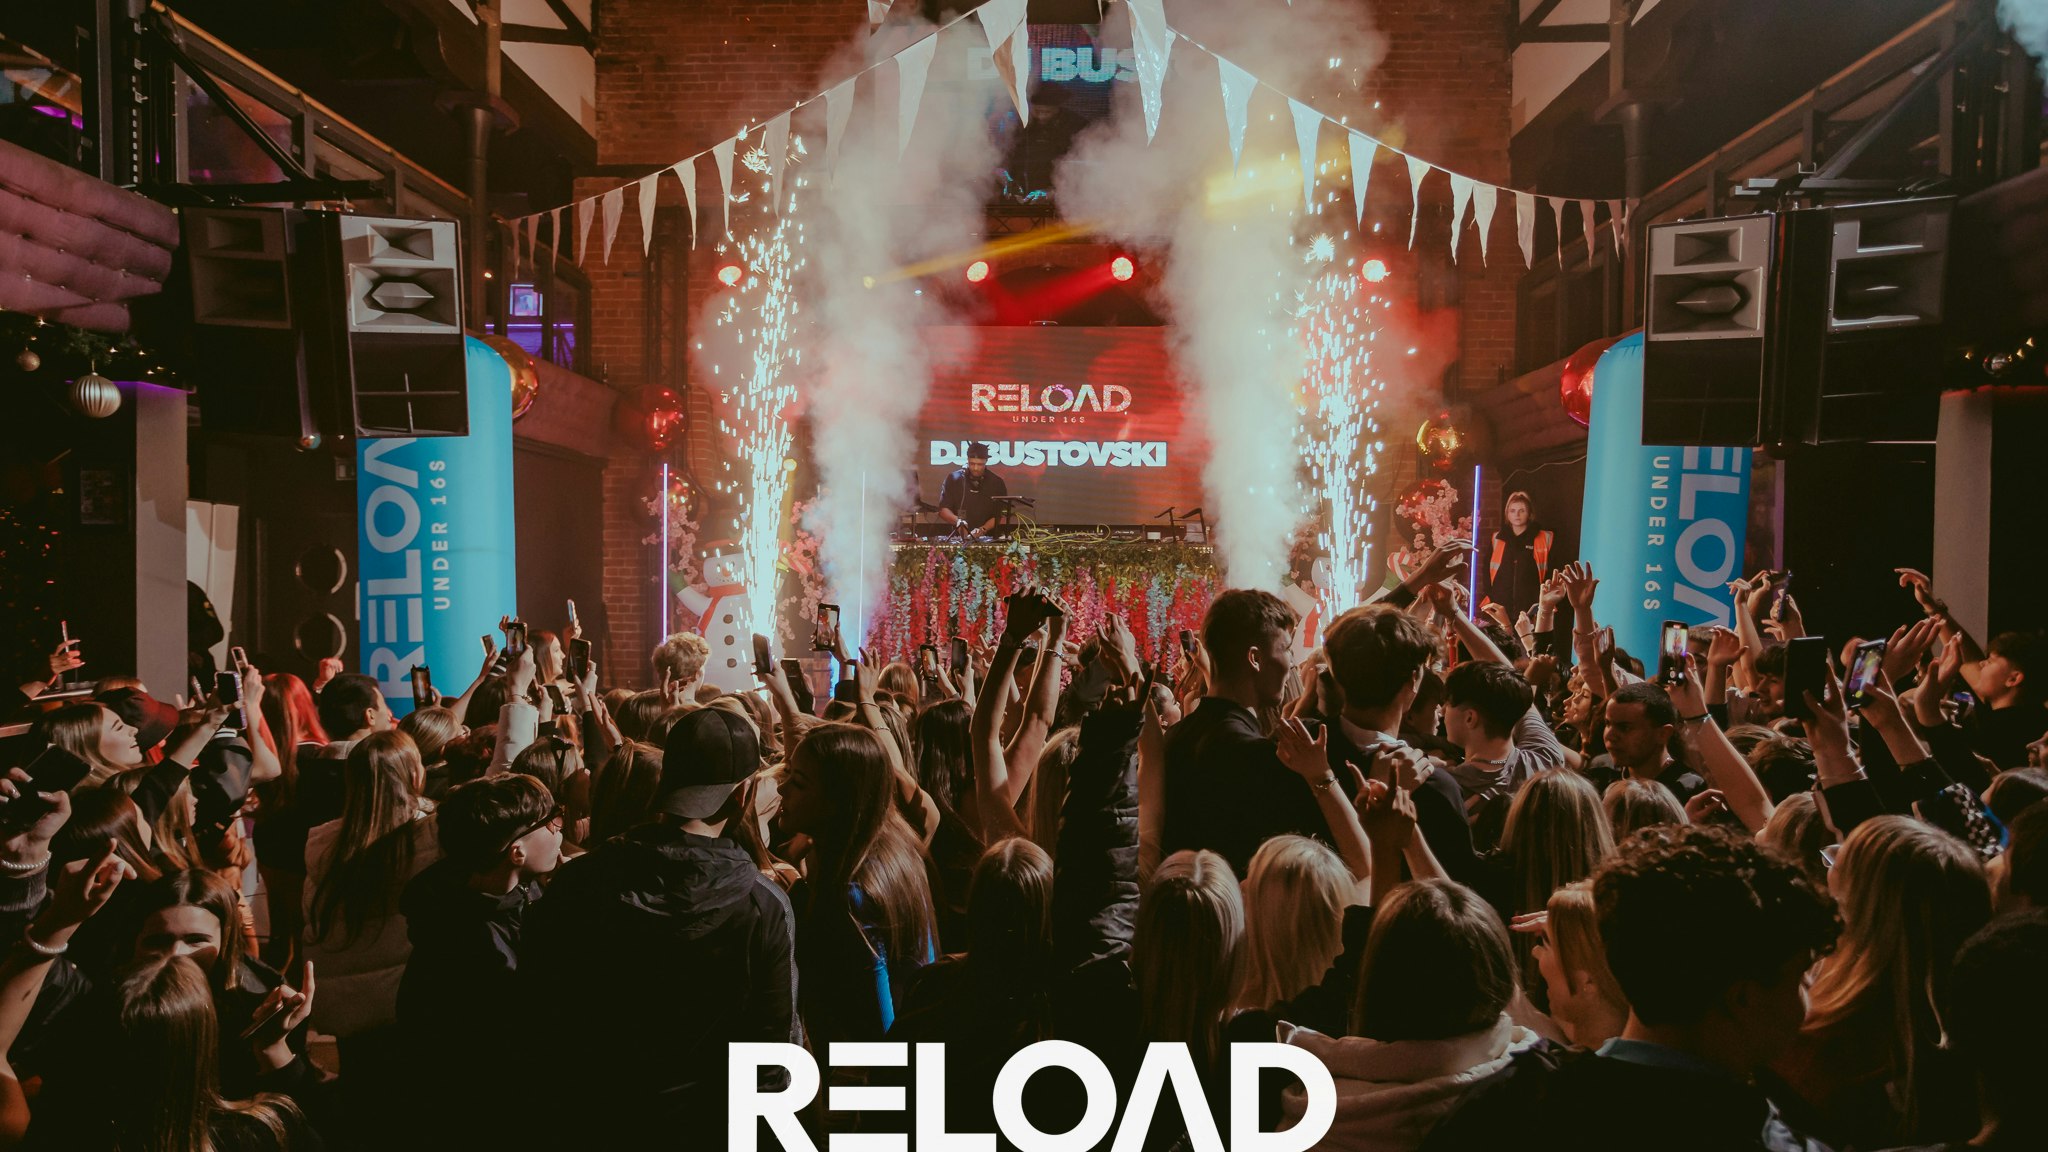 Reload Under 16s Shrewsbury is back – EASTER PARTY!